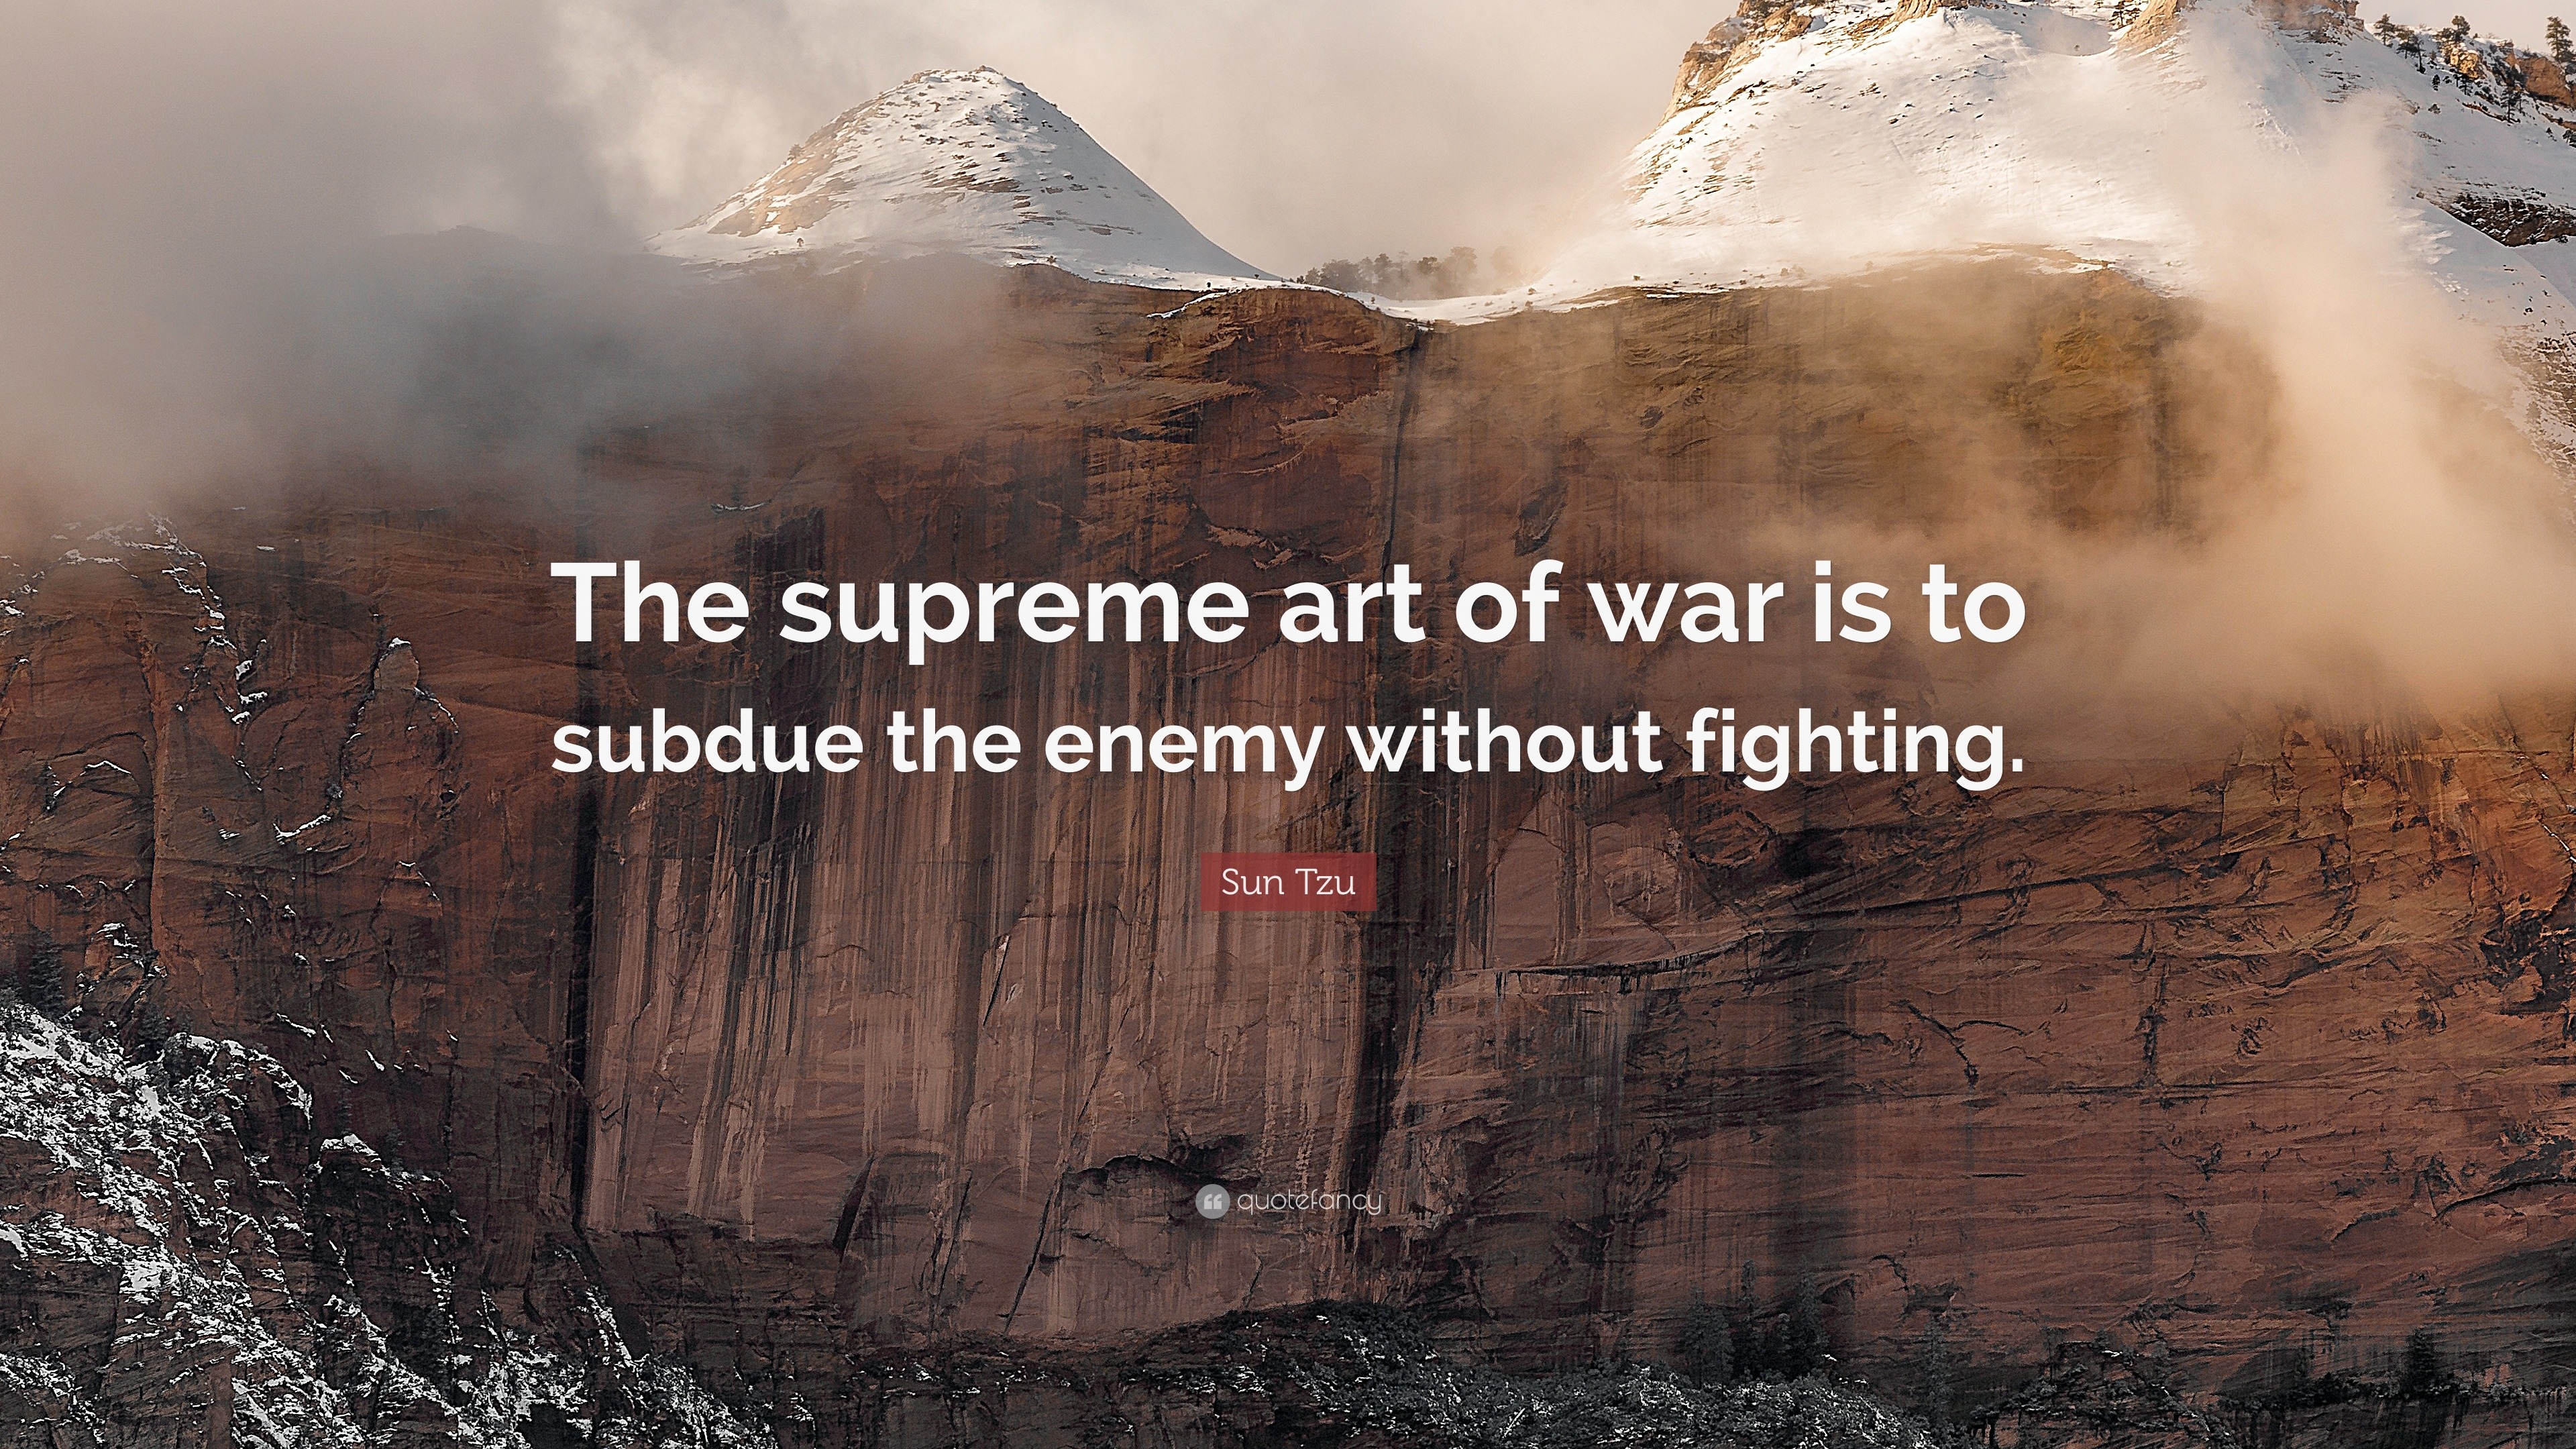 Sun Tzu Quote “The supreme art of war is to subdue the